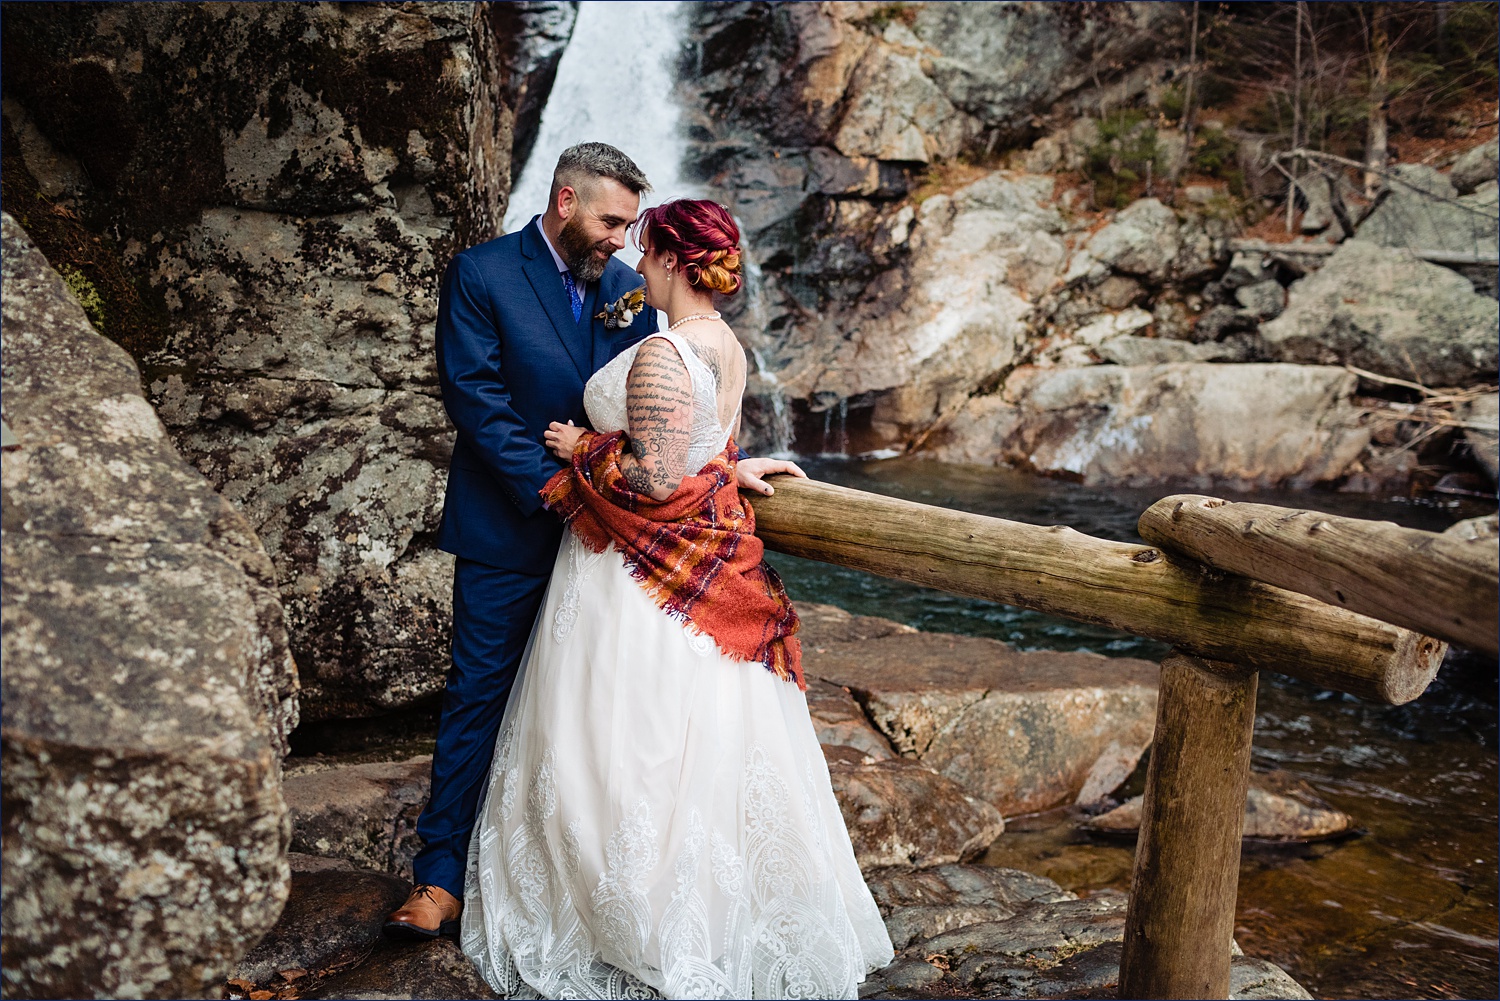 The bride and groom at Glen Ellis Falls out on the rocky waters overlooking the waterfalls before eloping